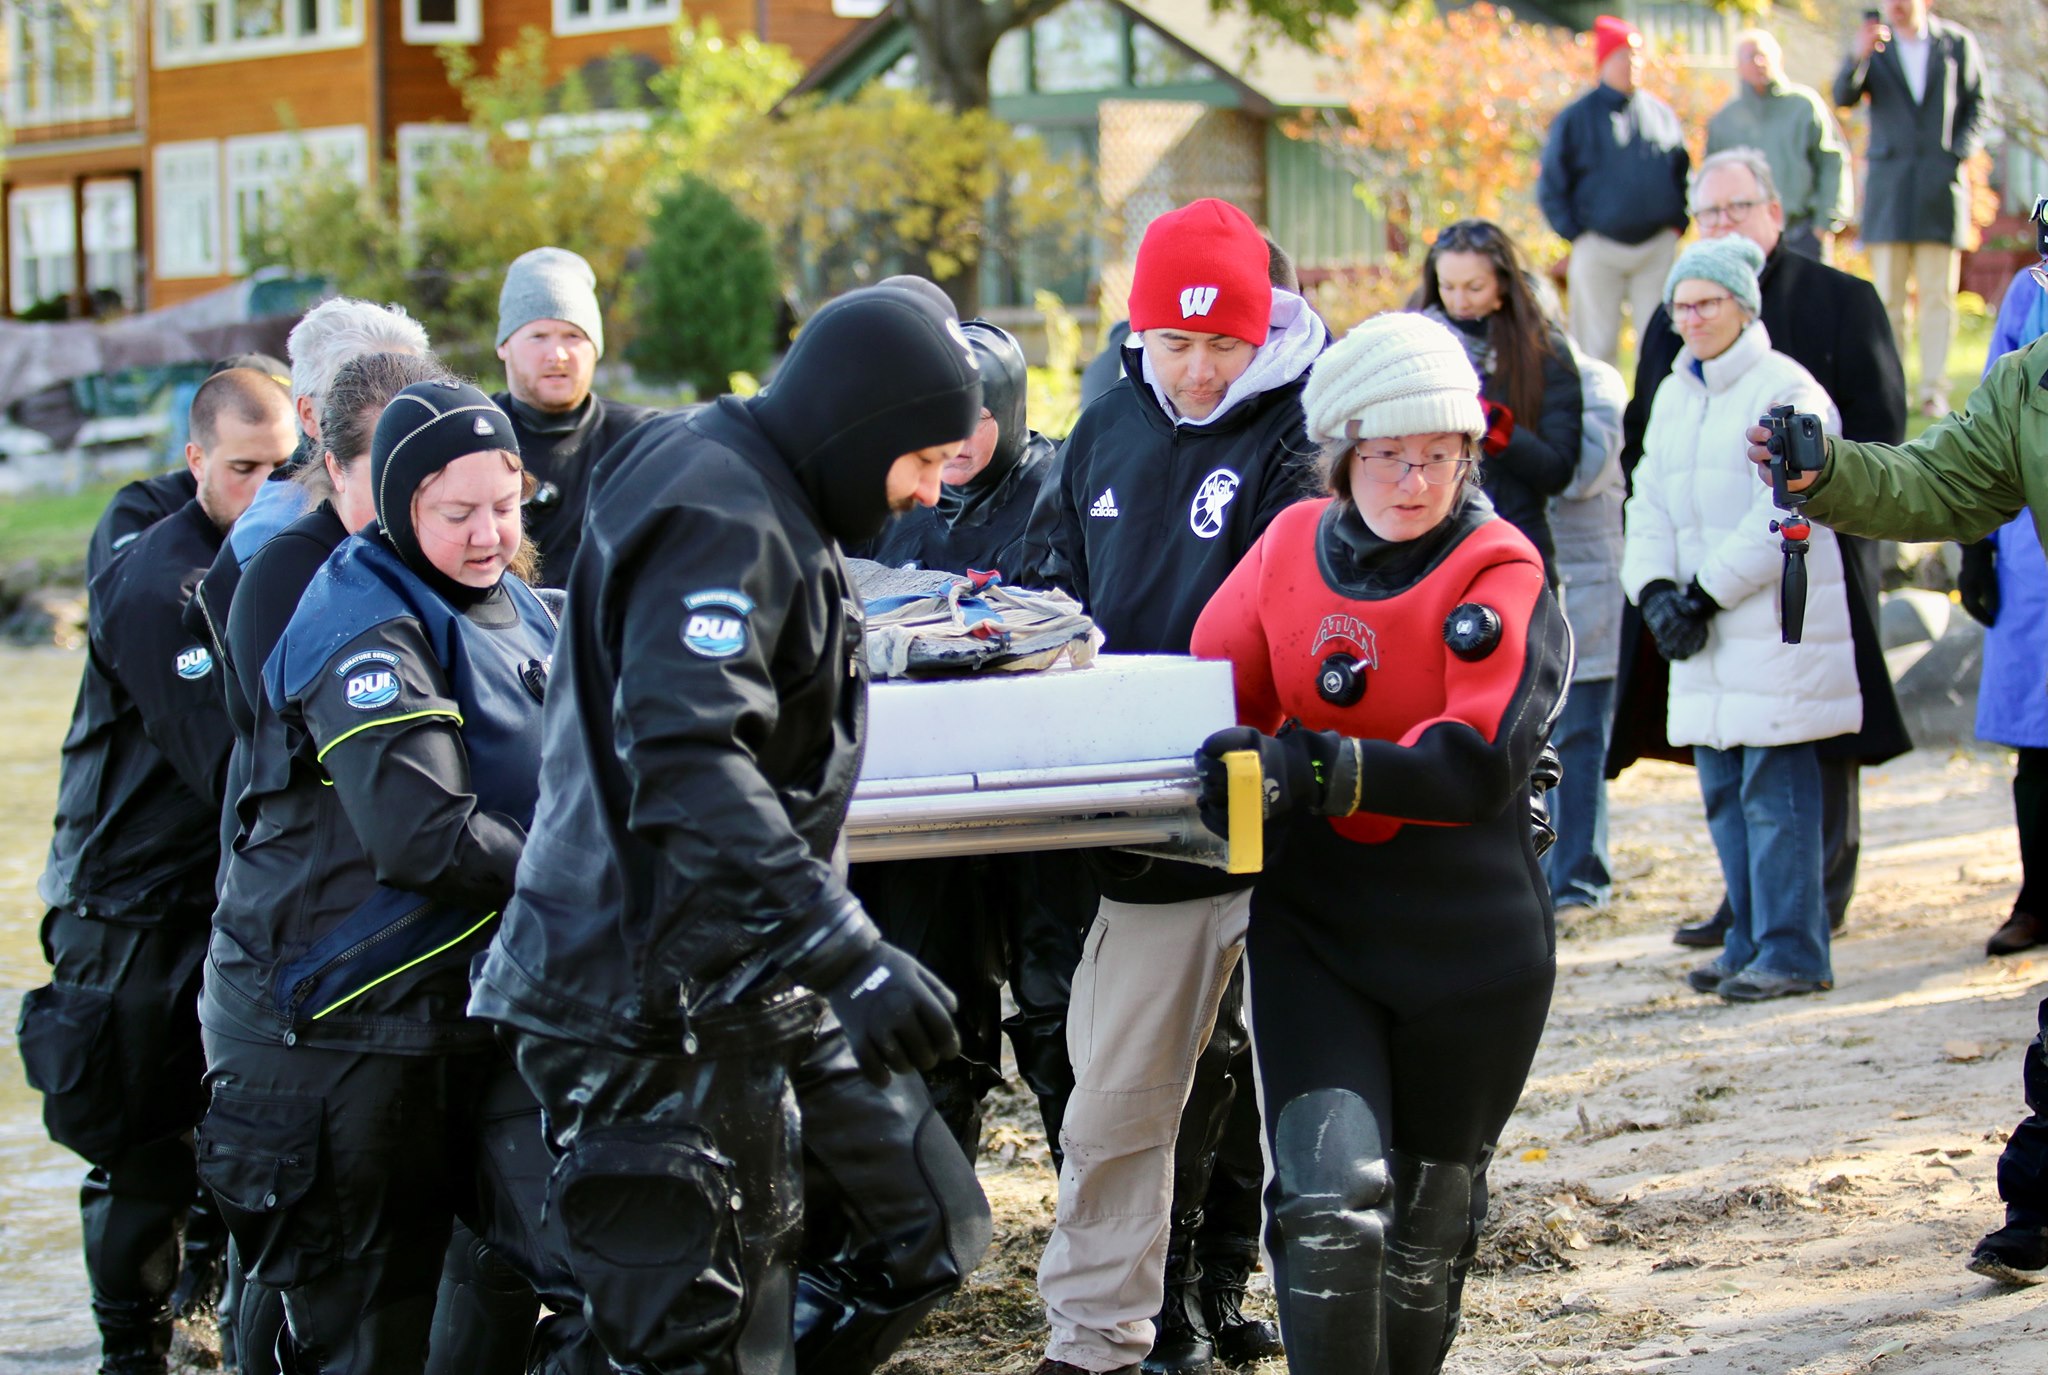 A 1,200-year-old canoe found in Lake Mendota is carried on a gurney for support after being recovered.